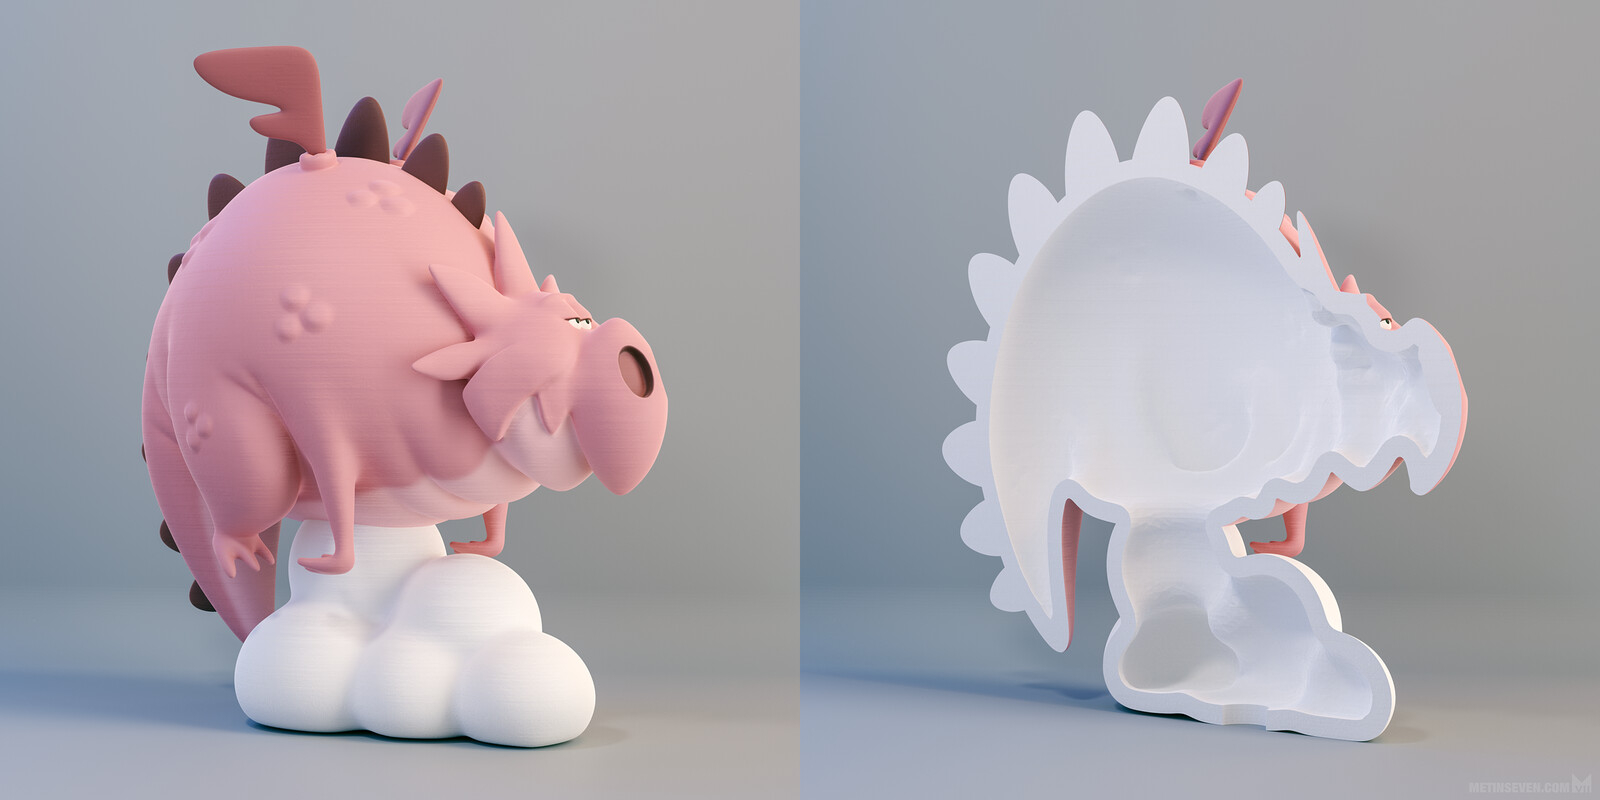 Dragon figure 3D print model, including a hollow inside and support material vent